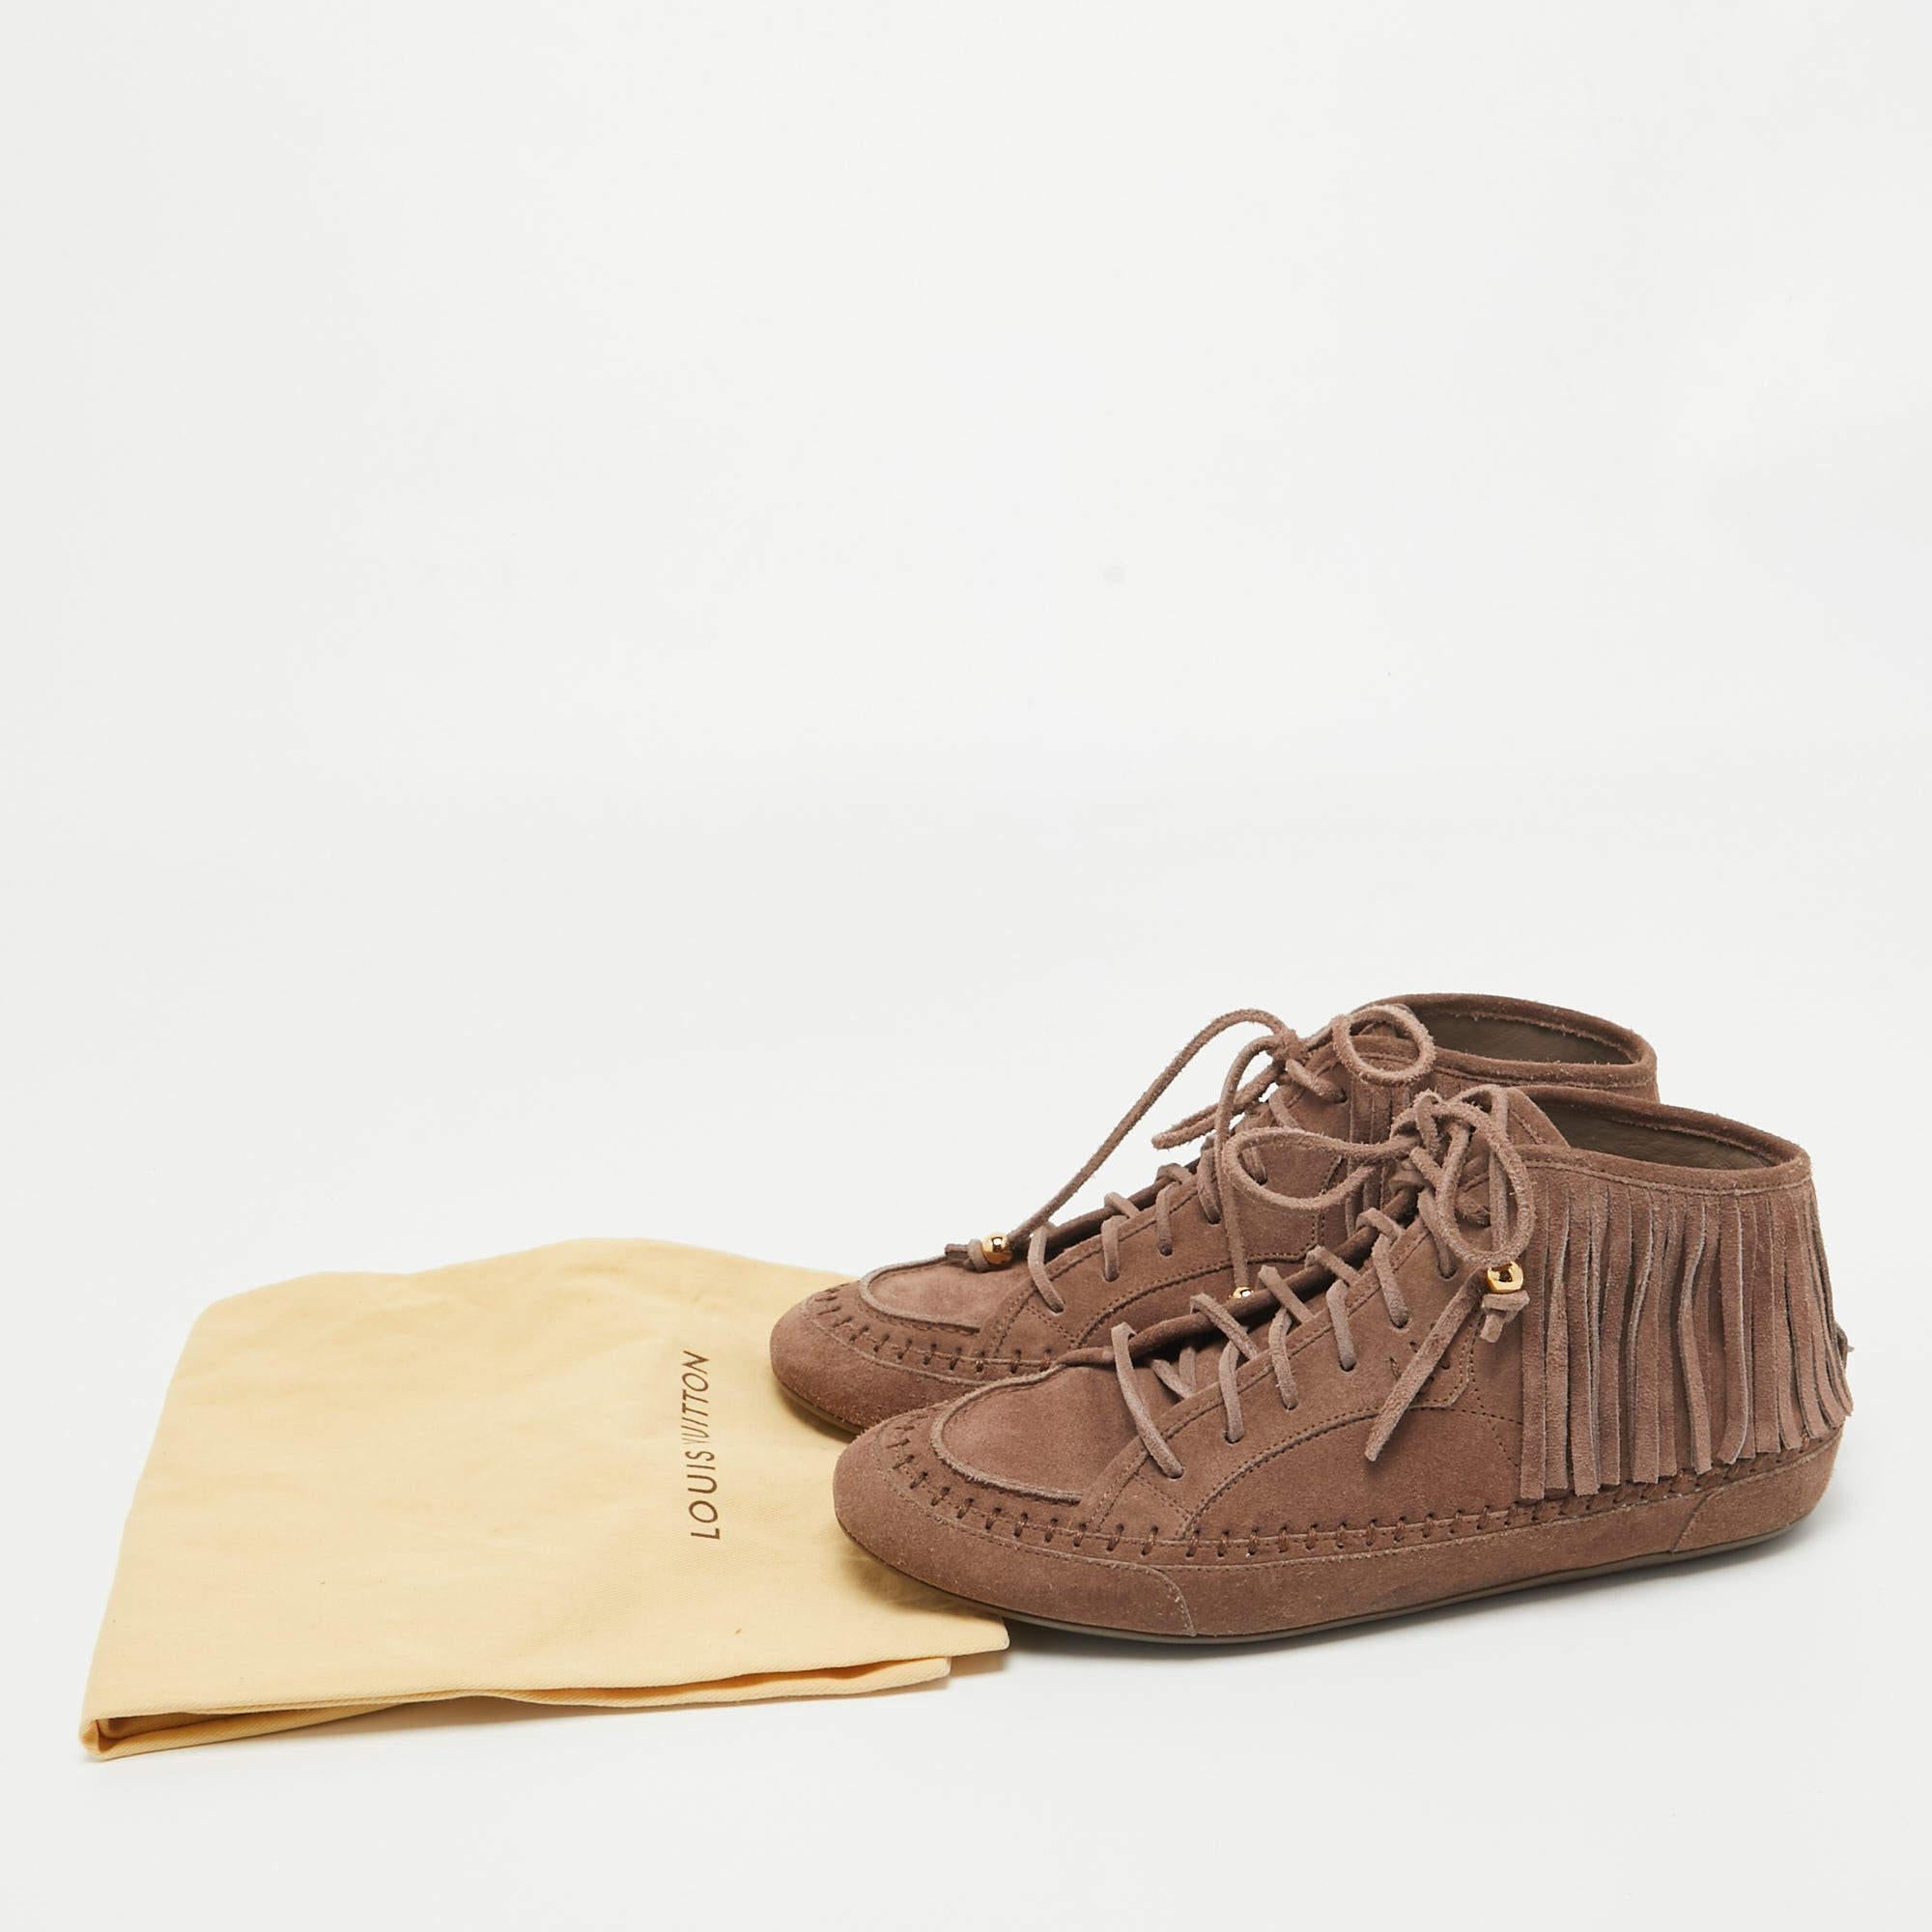 Louis Vuitton Brown Suede Fringe Details High Sneakers Size 39 For Sale 5